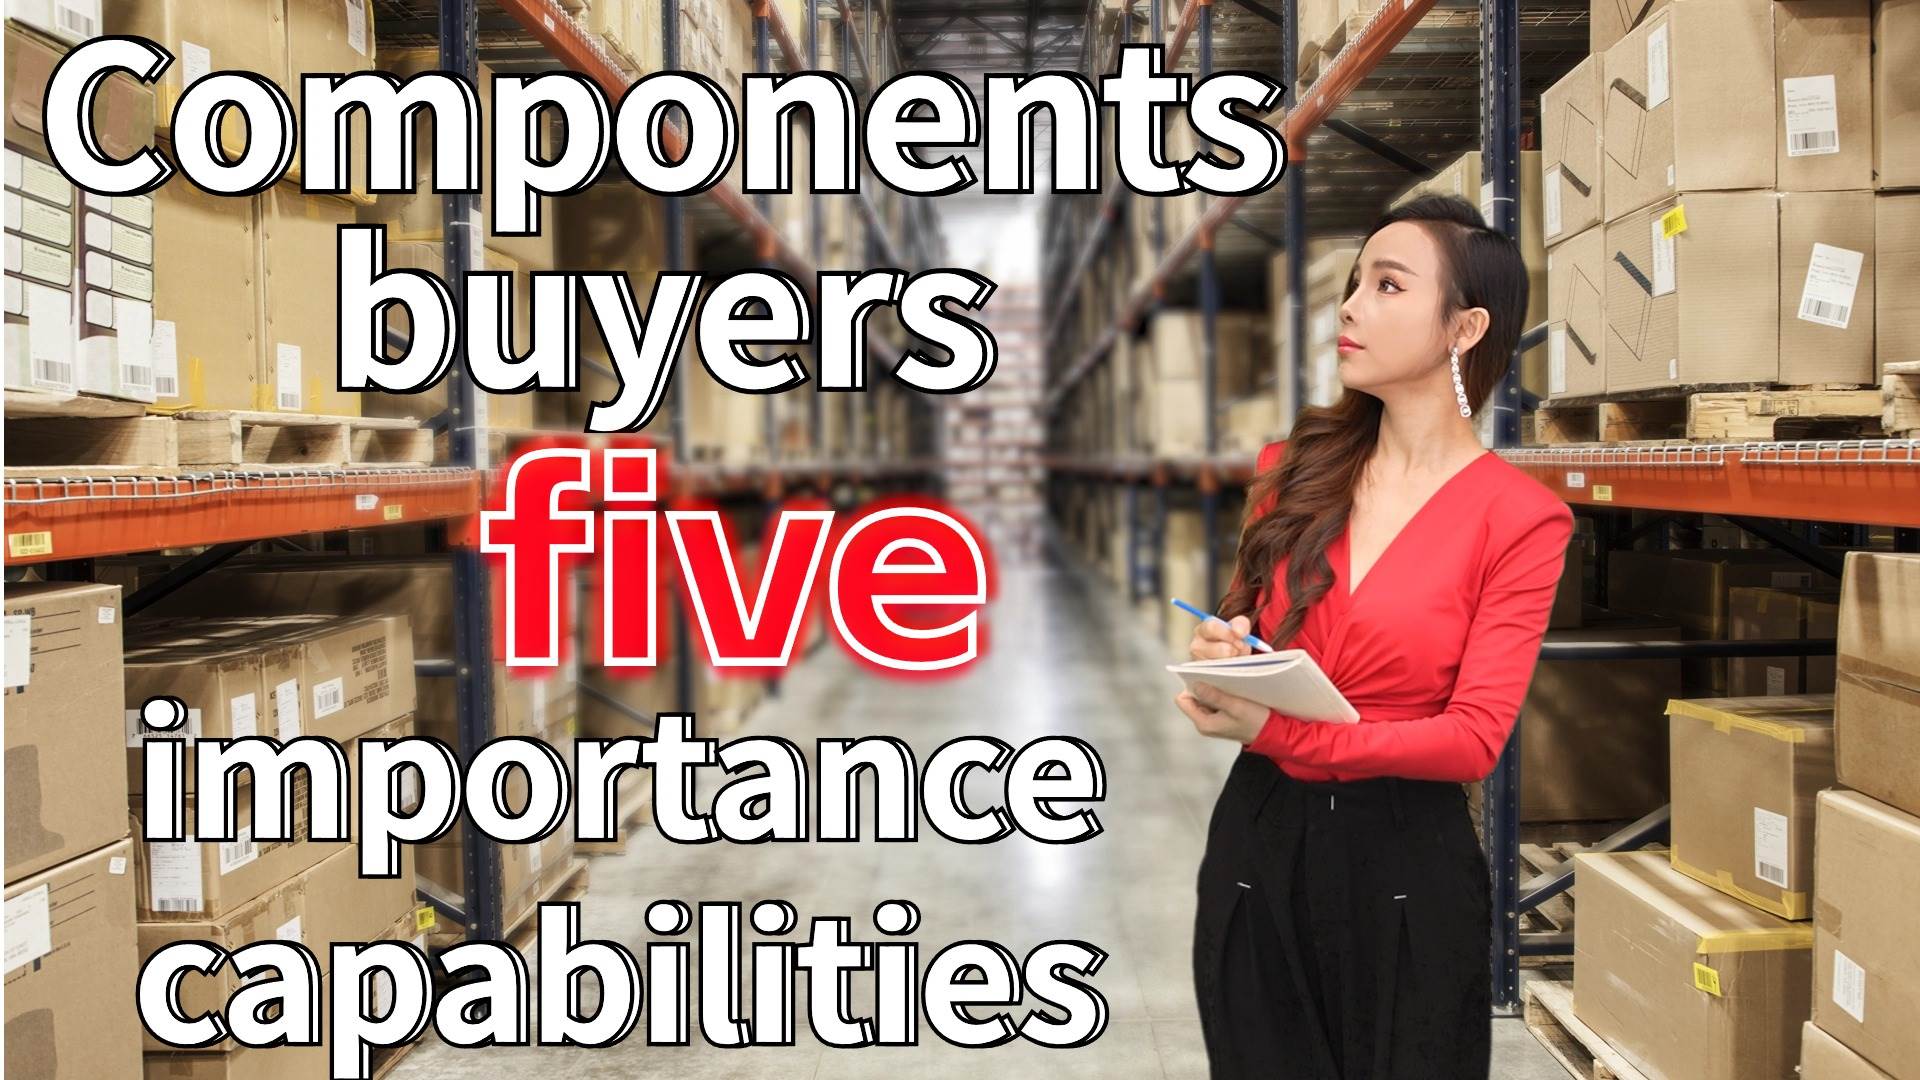 Electronic components buyers five importance capabilities